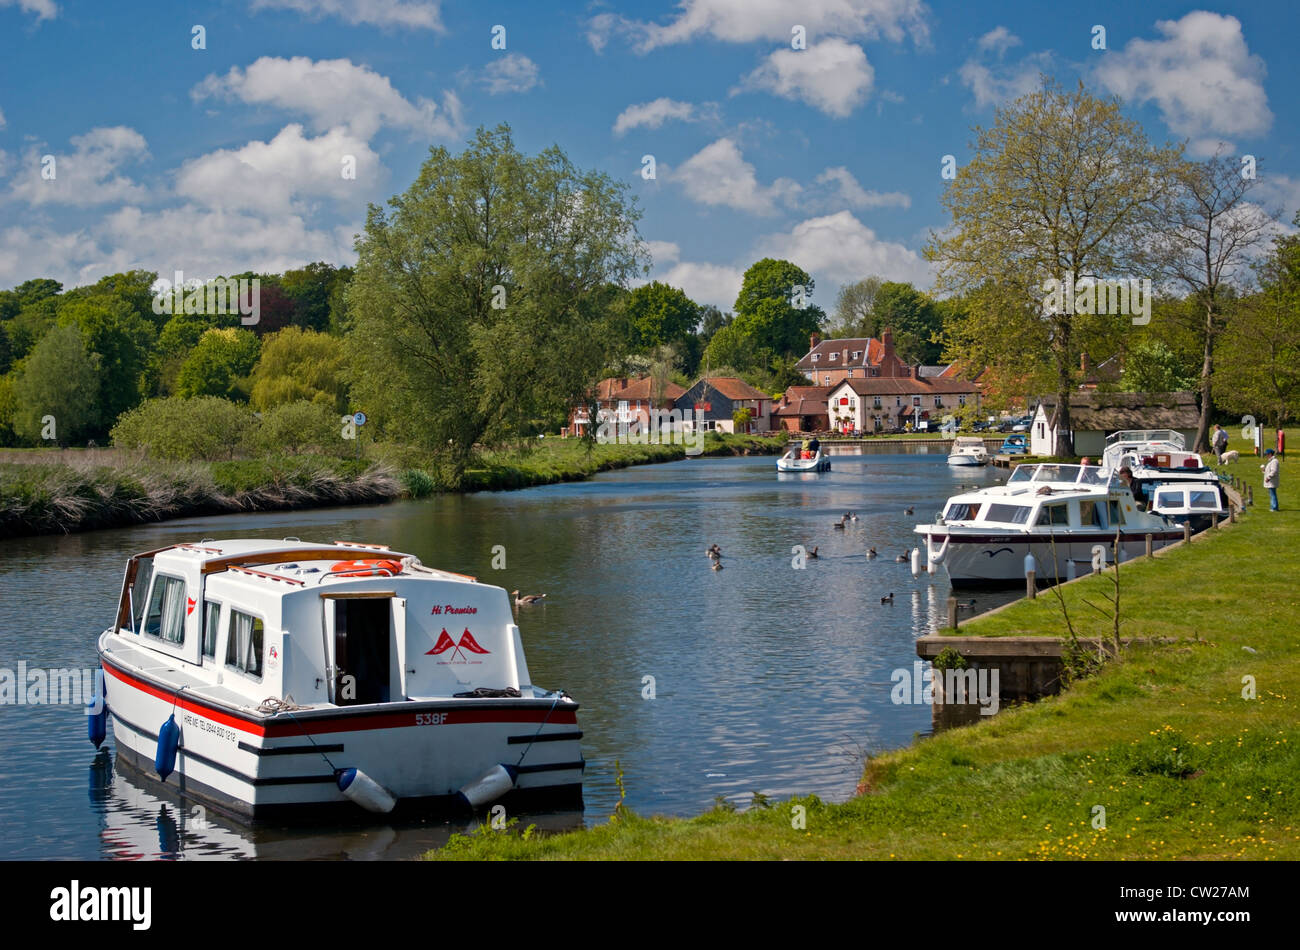 The River Bure at Coltishall Common, Norfolk, a picturesque setting on the Norfolk Broads. Stock Photo